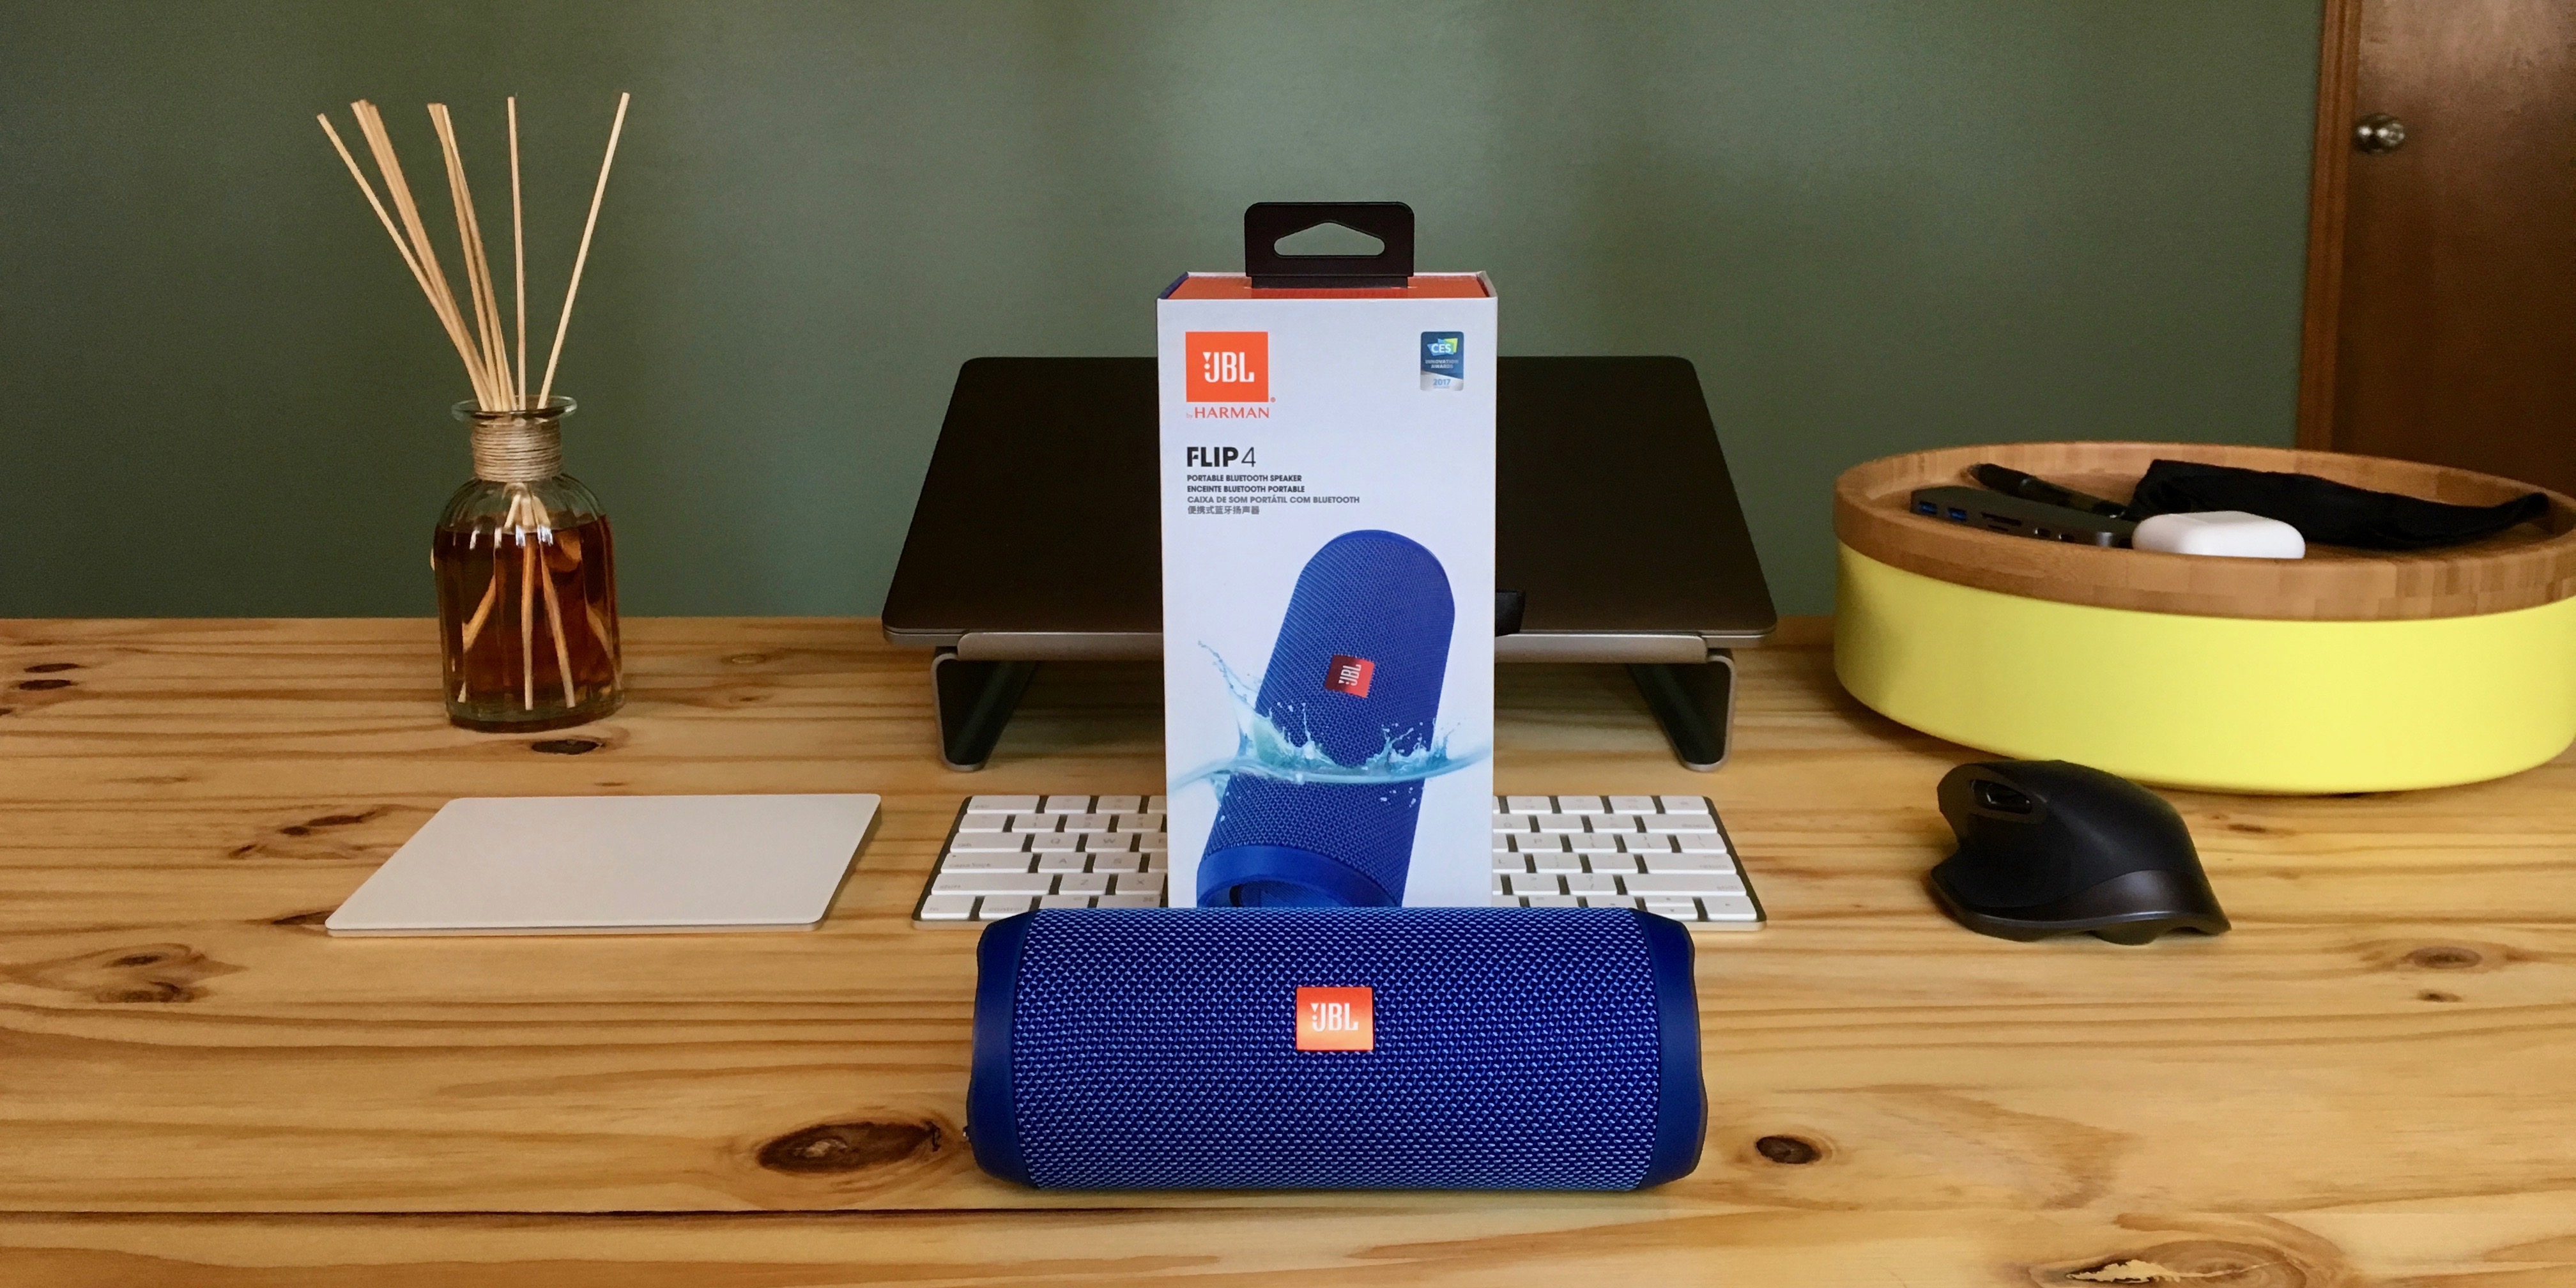 Bourgeon Voorkeur grens Review: JBL's Flip 4 waterproof speaker offers great sound and features at  a fair price